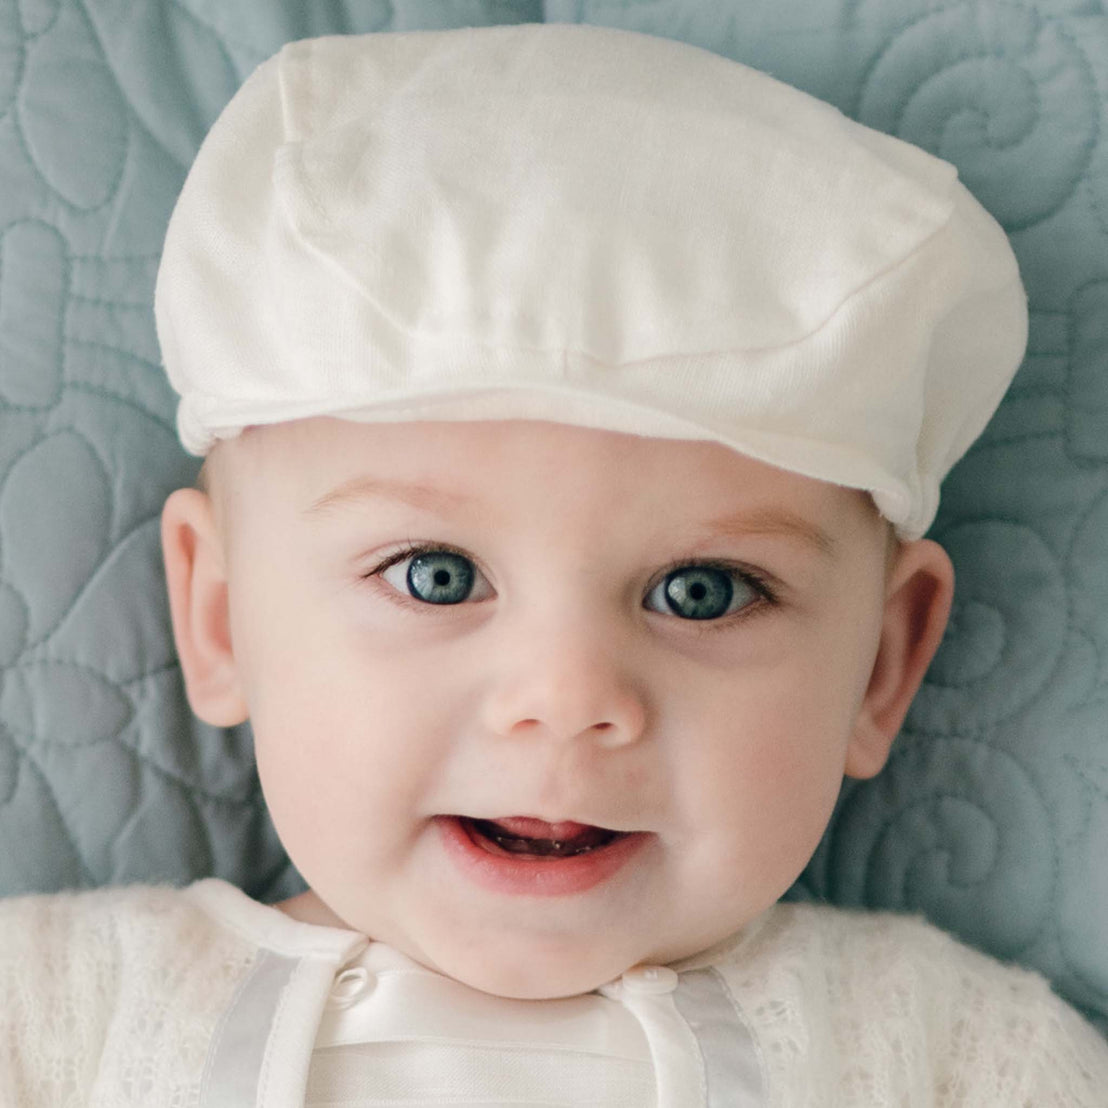 A baby with blue eyes is wearing a handmade white Oliver Linen Newsboy Cap and white clothing. The baby is looking directly at the camera with a slight smile, positioned against a quilted light blue background.